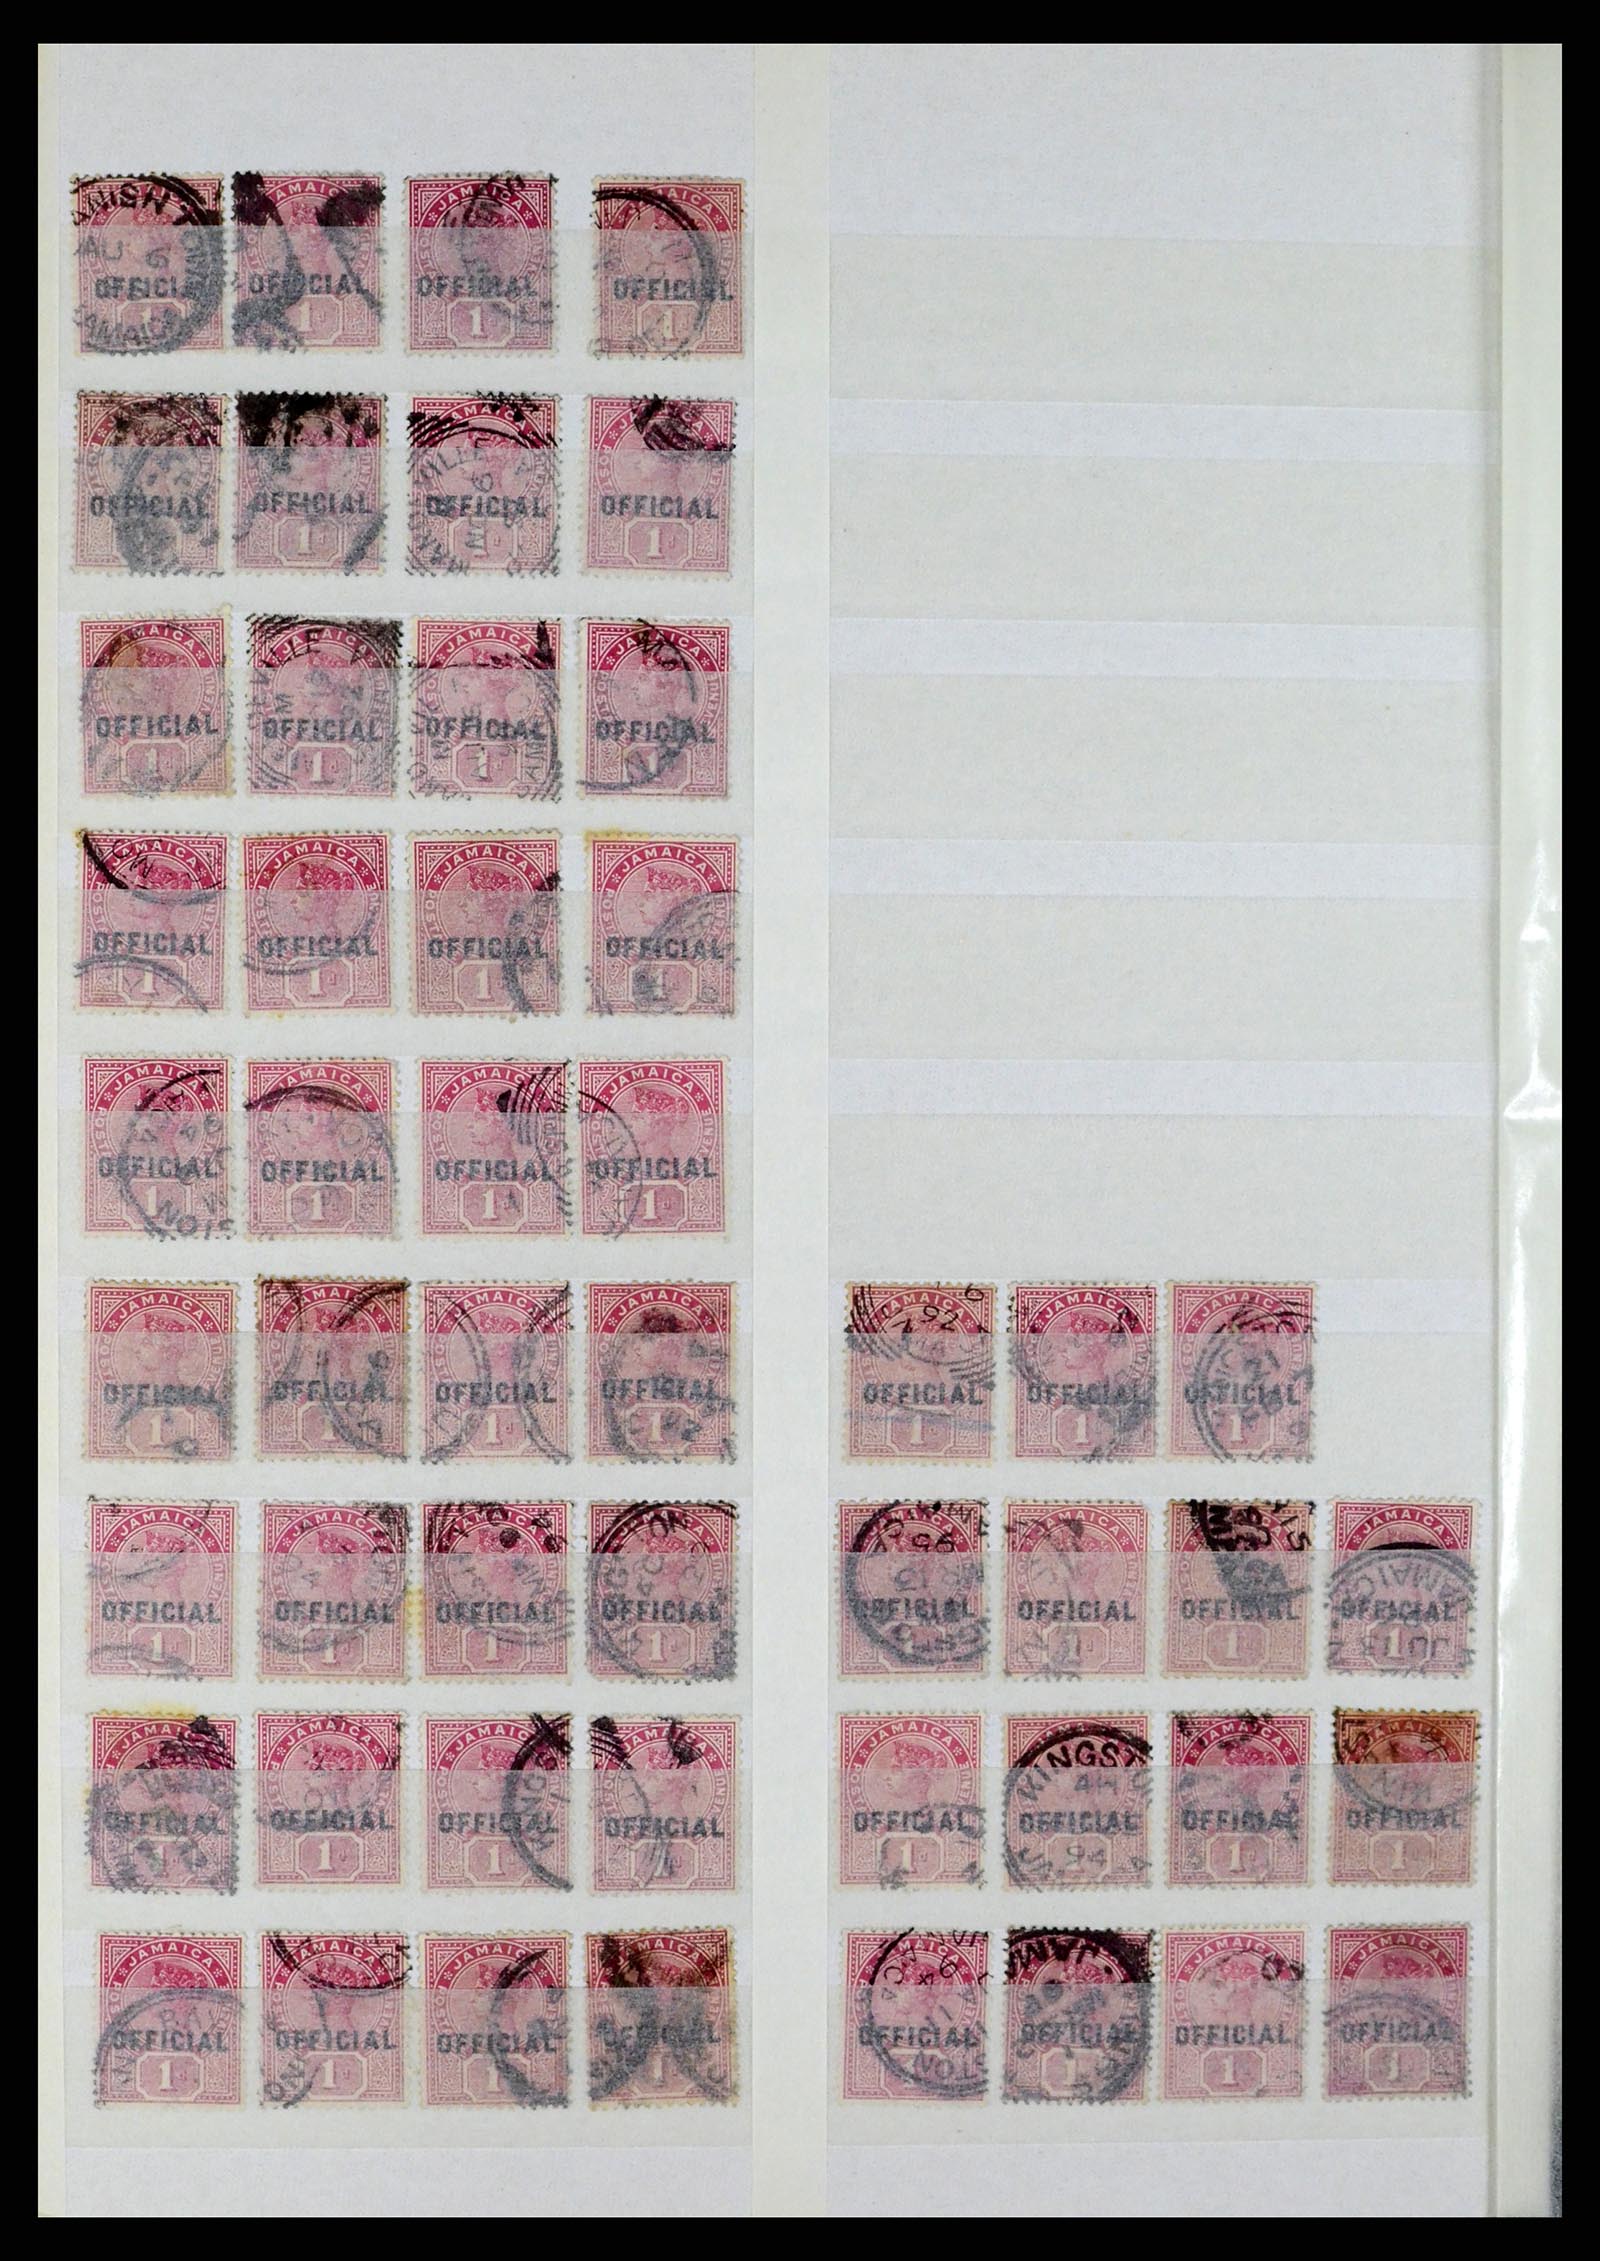 36920 015 - Stamp collection 36920 Jamaica cancels 1860-ca. 1920.